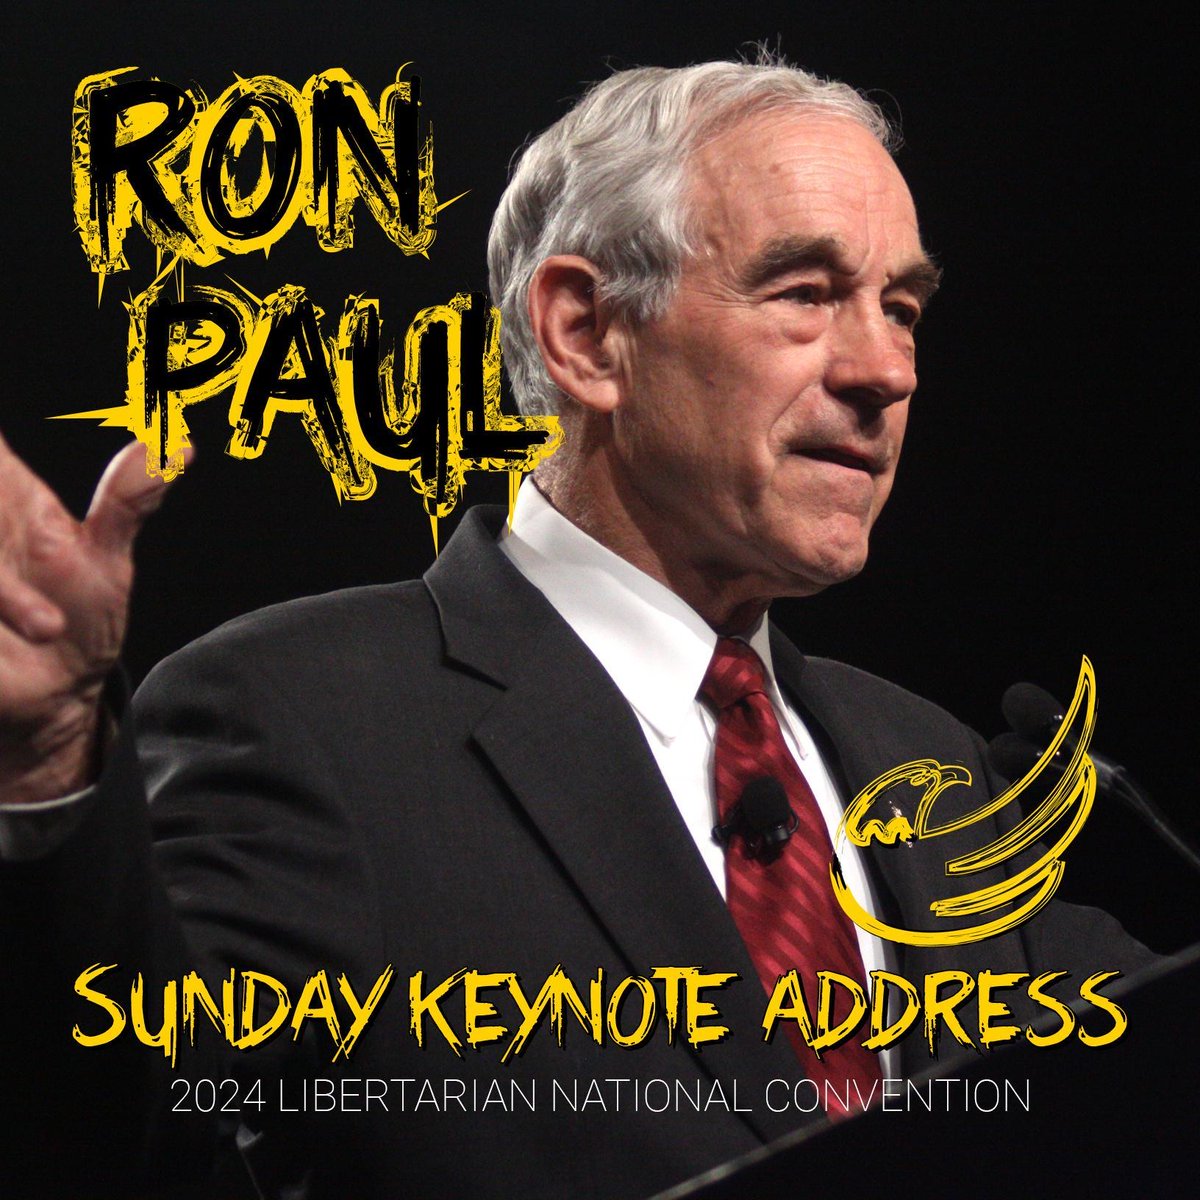 Dr. Ron Paul to Close Out Libertarian Convention with Keynote Speech Sunday, May 26th Washington DC, May 21st, 2024 — The Libertarian National Convention will close out its 2024 event by hosting Dr. Ron Paul, a man that many in the liberty movement credit with bringing them into